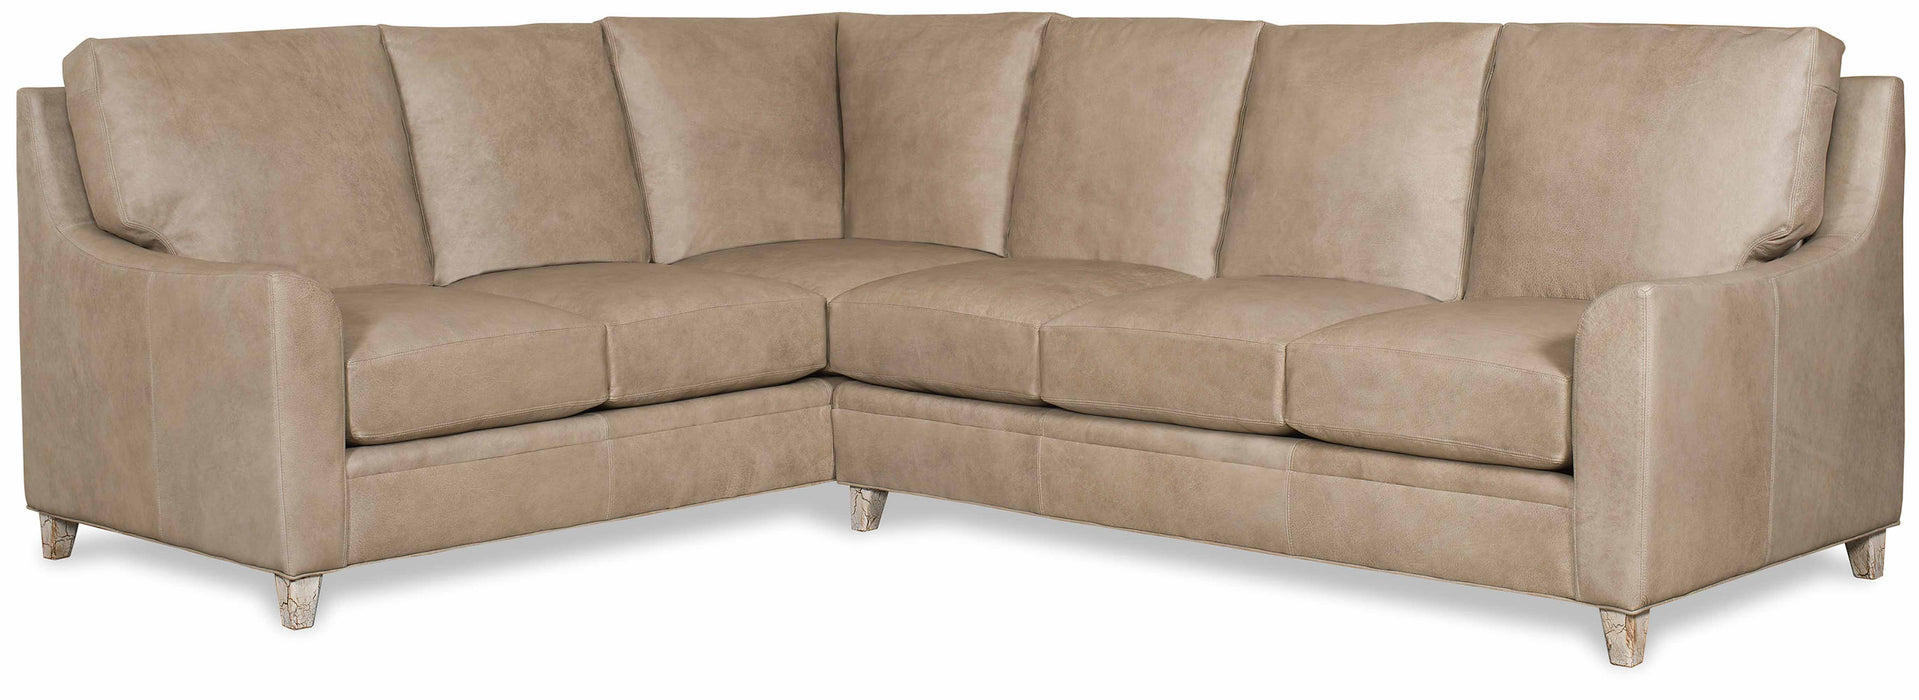 Breckenridge Leather Sectional